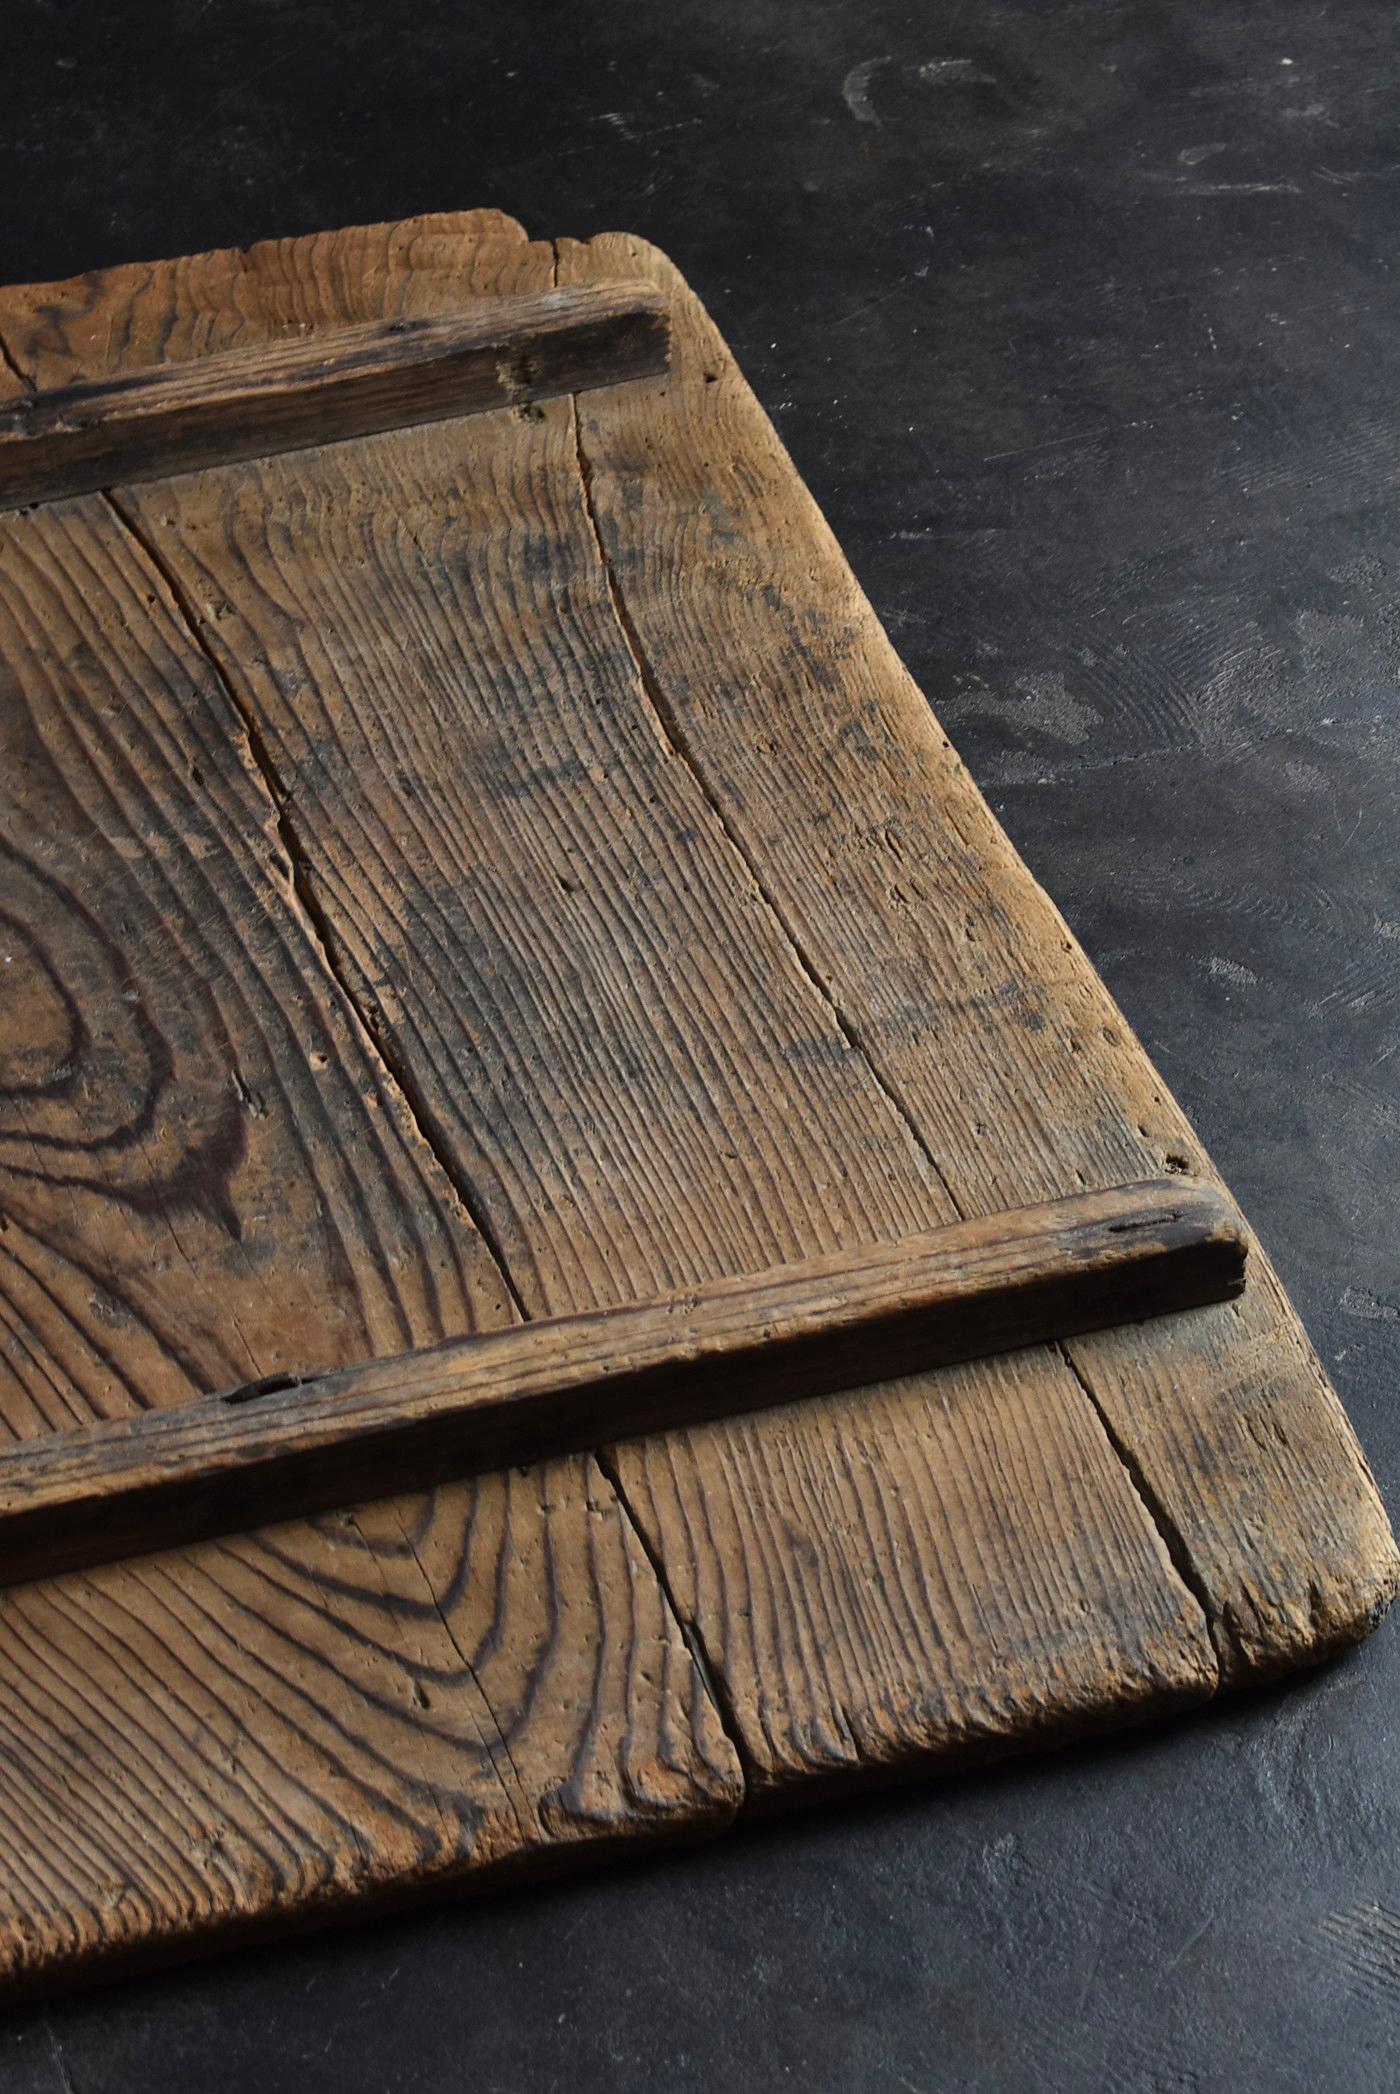 Around the 20th Century, Old Japanese Wooden Boards or Working Boards 8